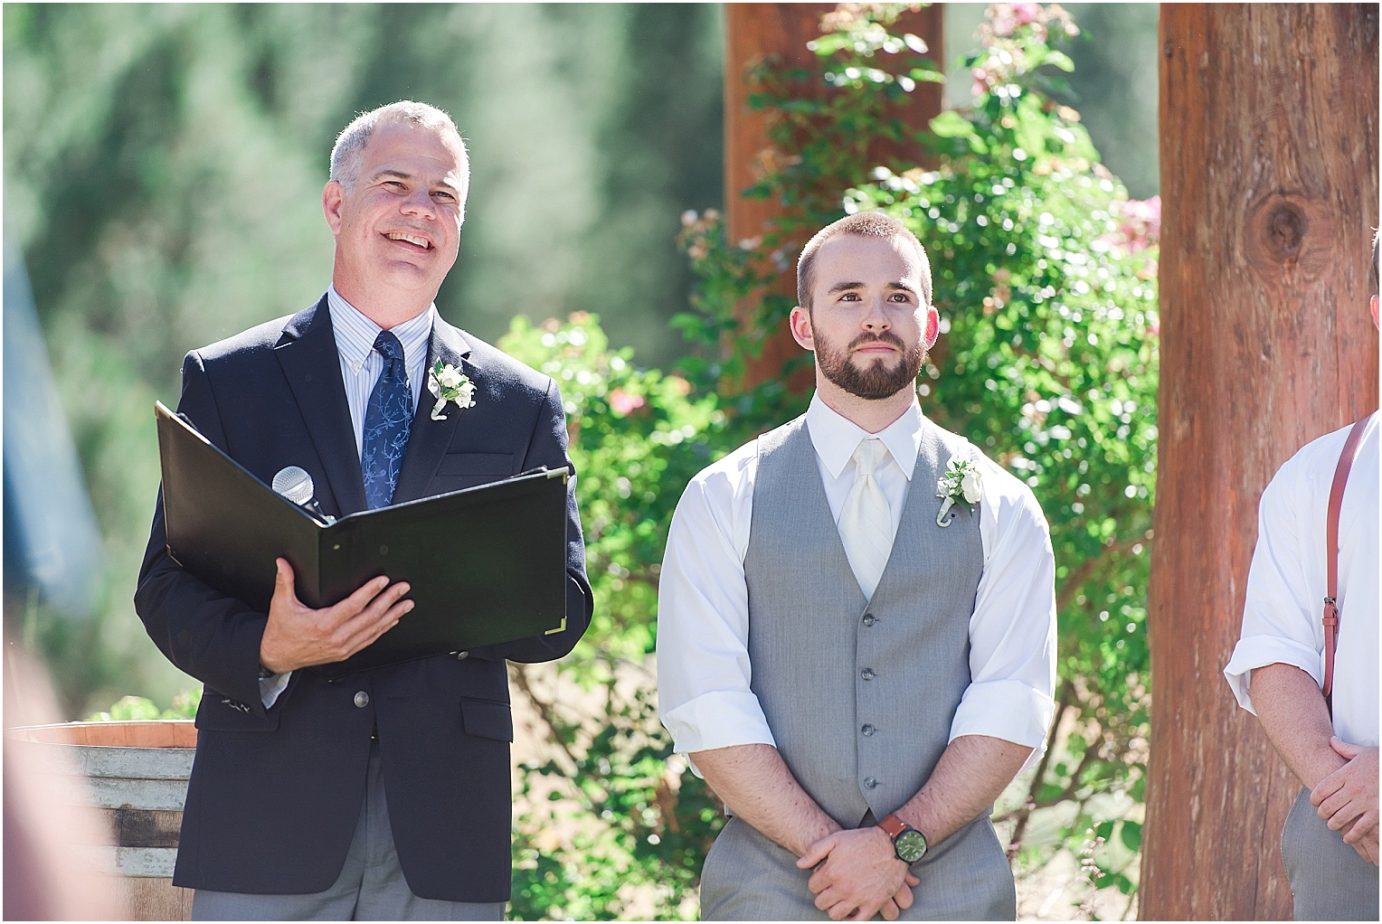 Pine River Ranch Wedding Leavenworth WA Matt and Kelsey outdoor ceremony in the mountains